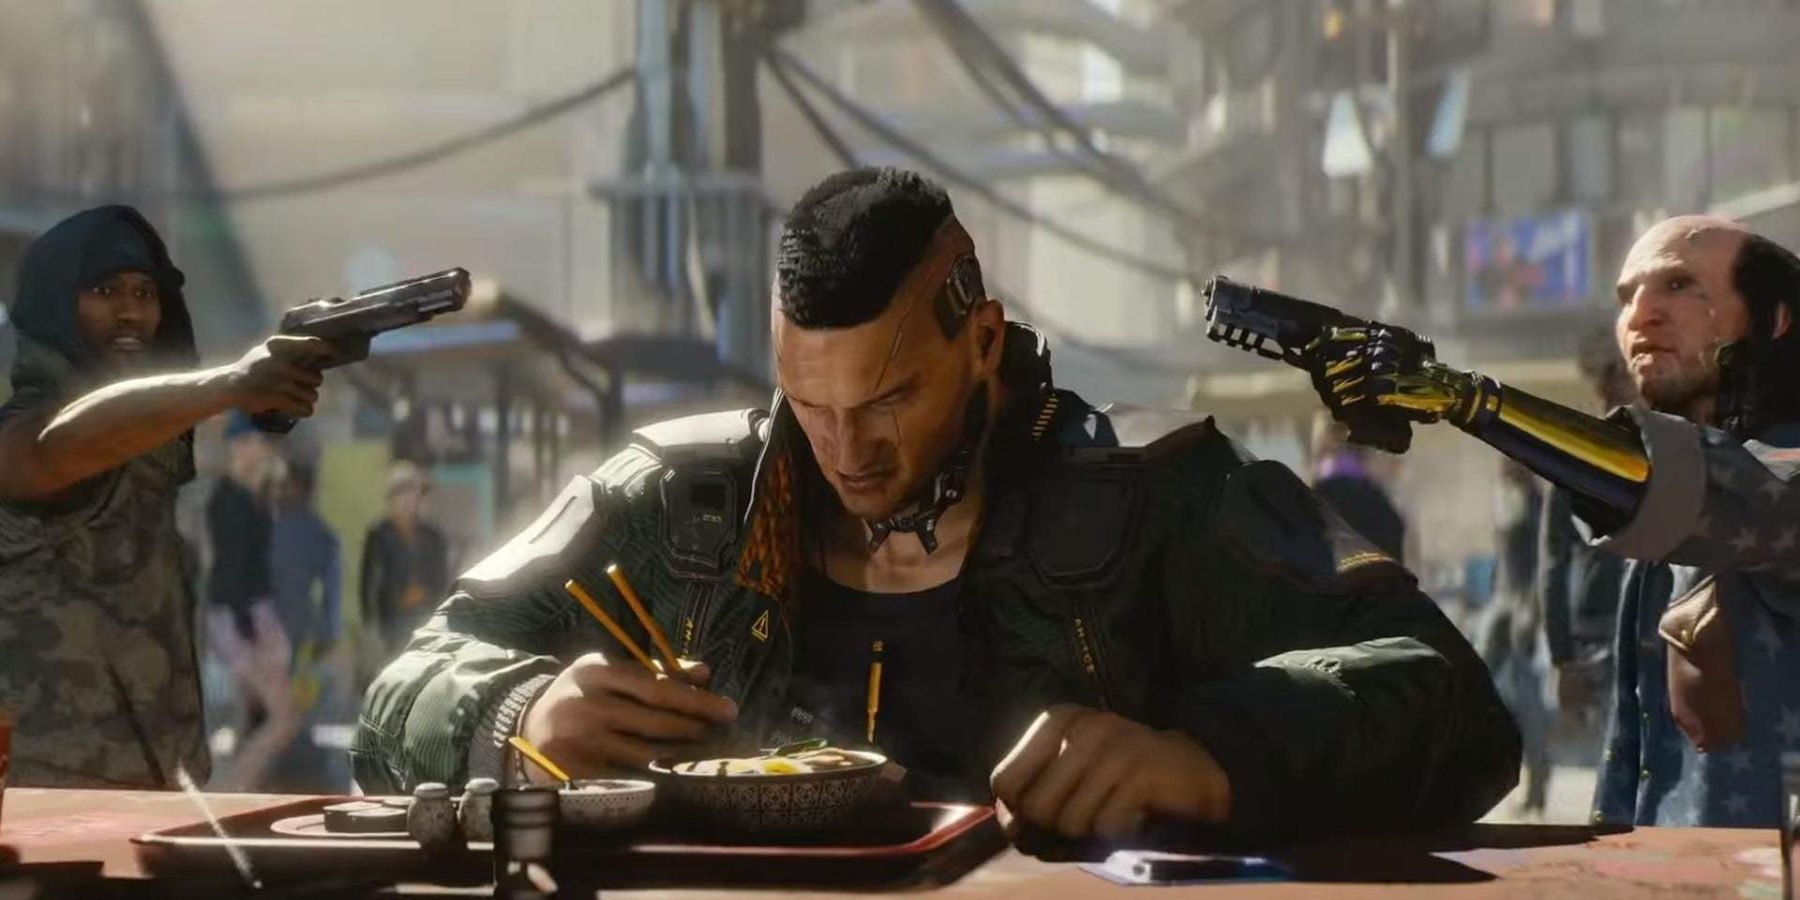 cyberpunk-2077-dev-says-team-put-a-lot-of-effort-intro-update-13-cosmetic-dlc-is-just-cherries-on-top-5049685